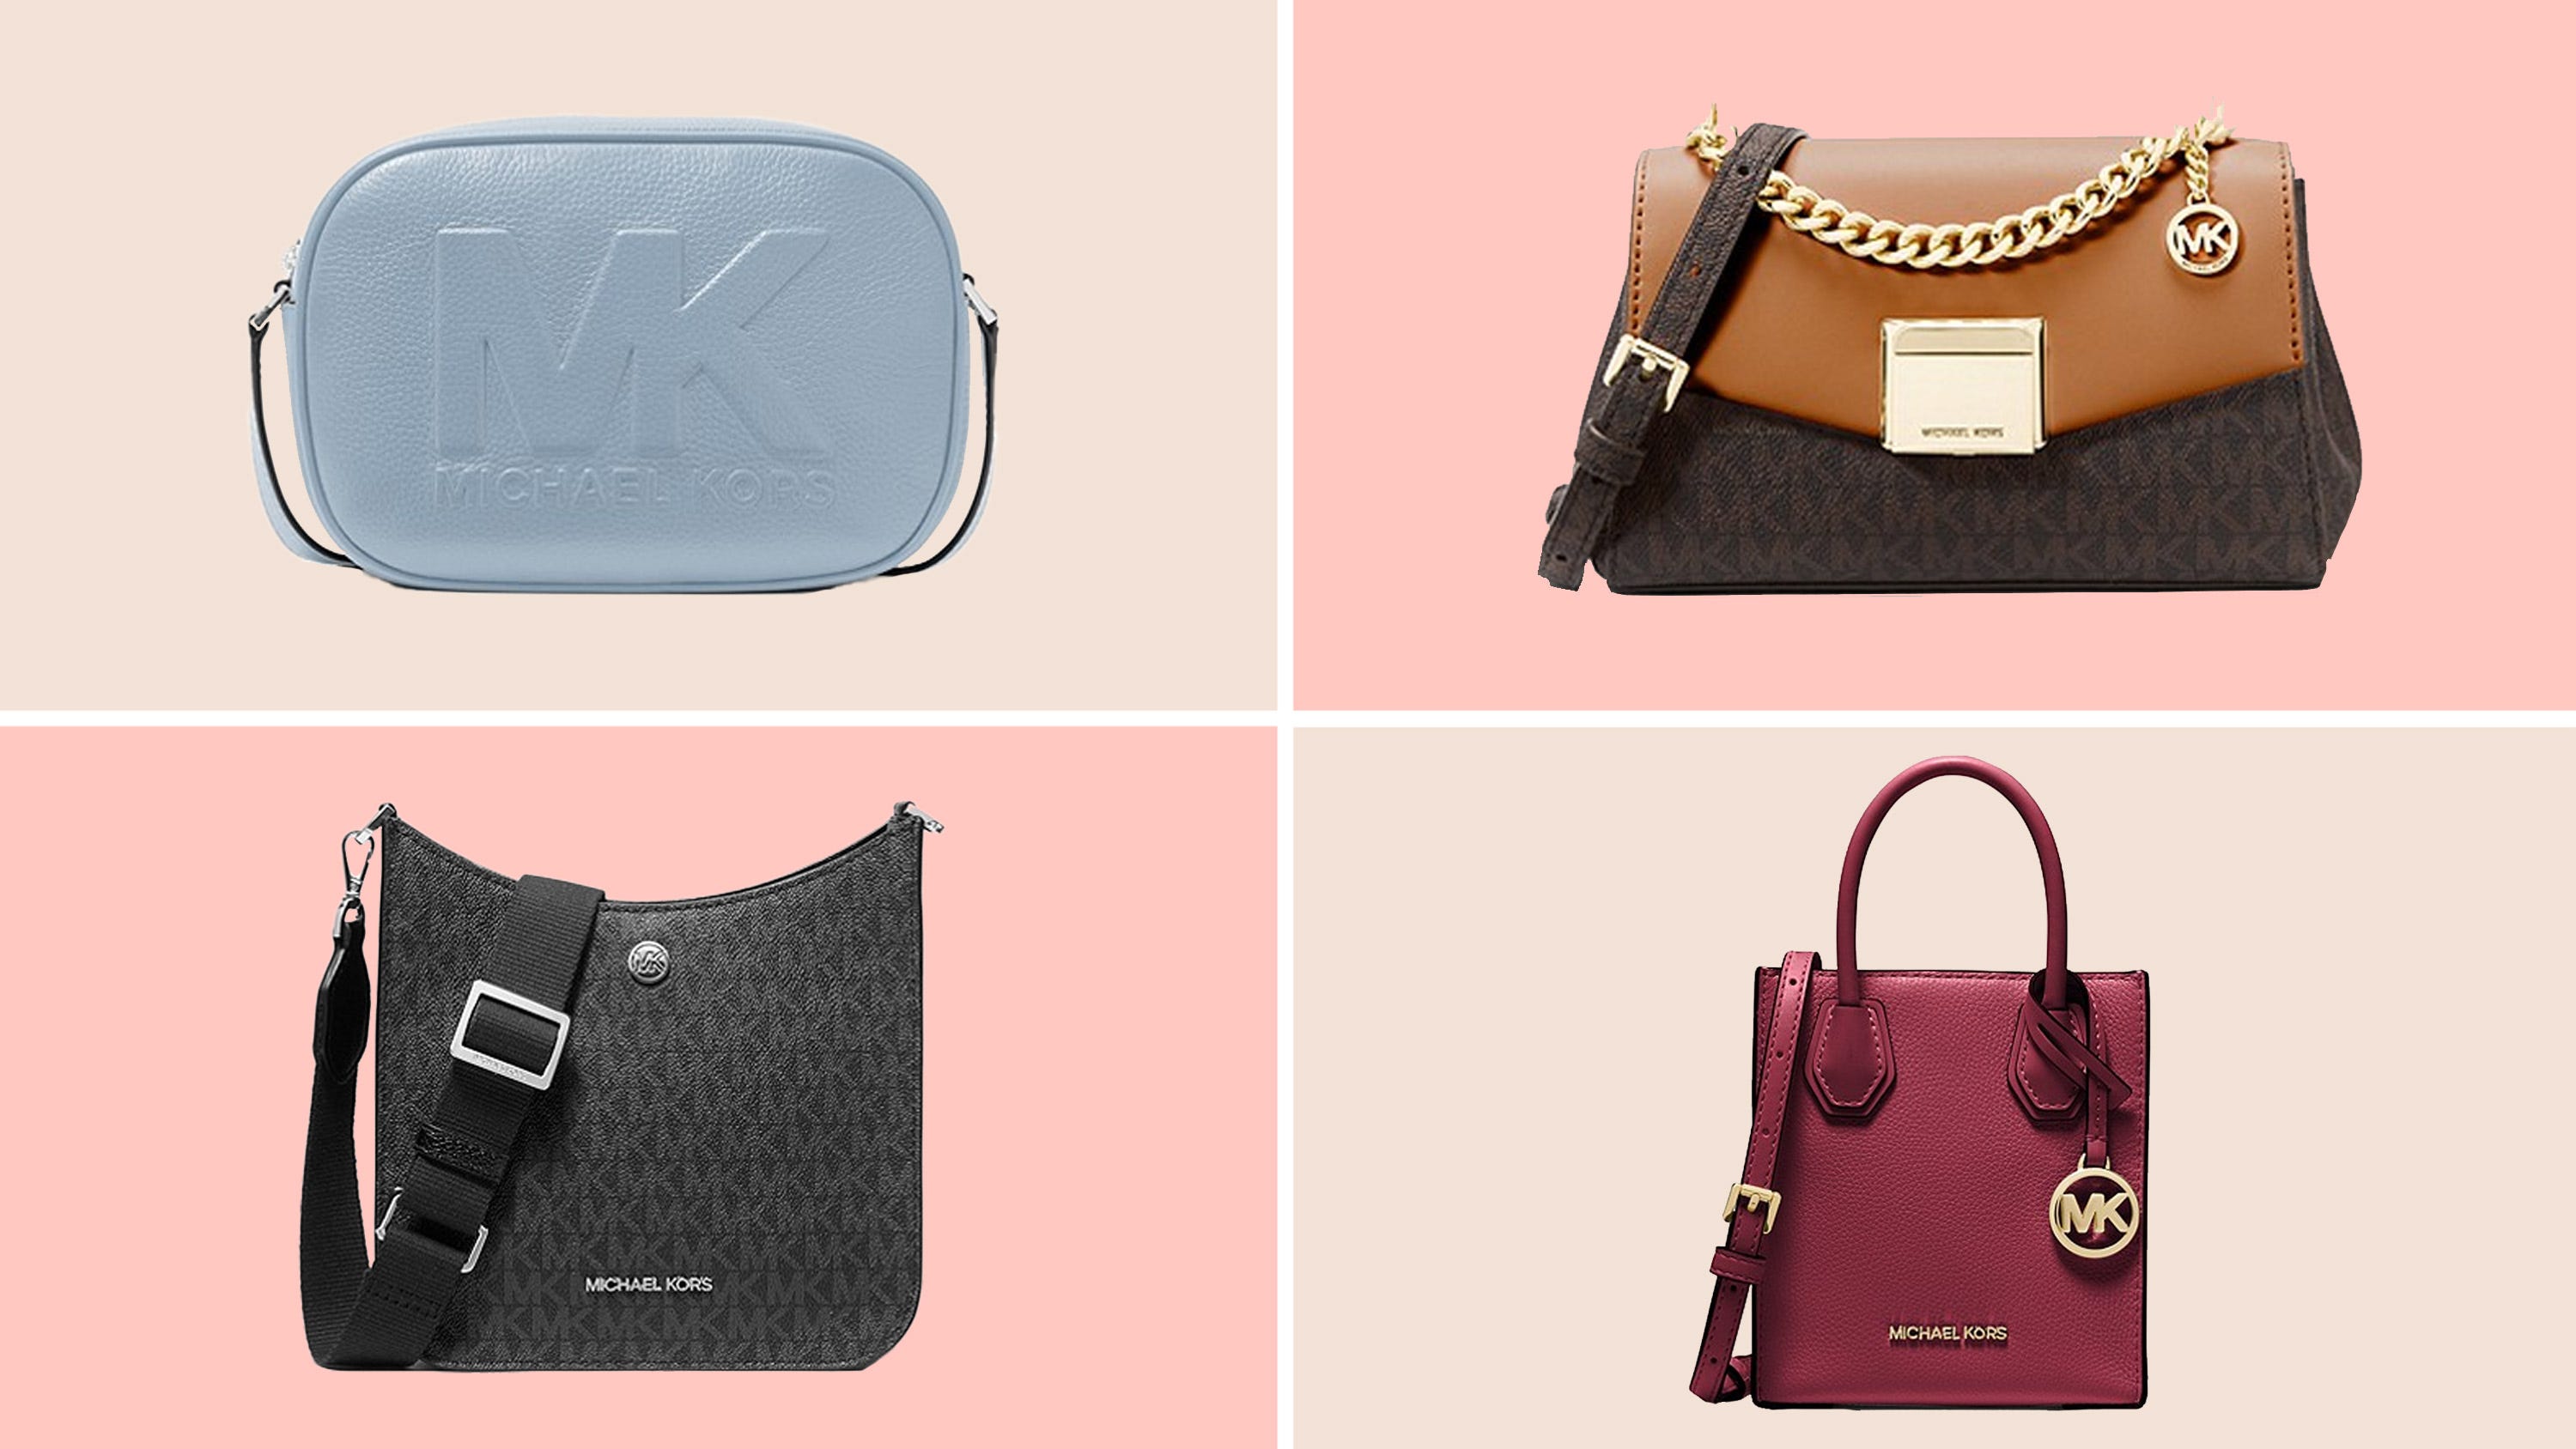 Michael Kors sale: Take an extra 25% off purses, totes and crossbodies